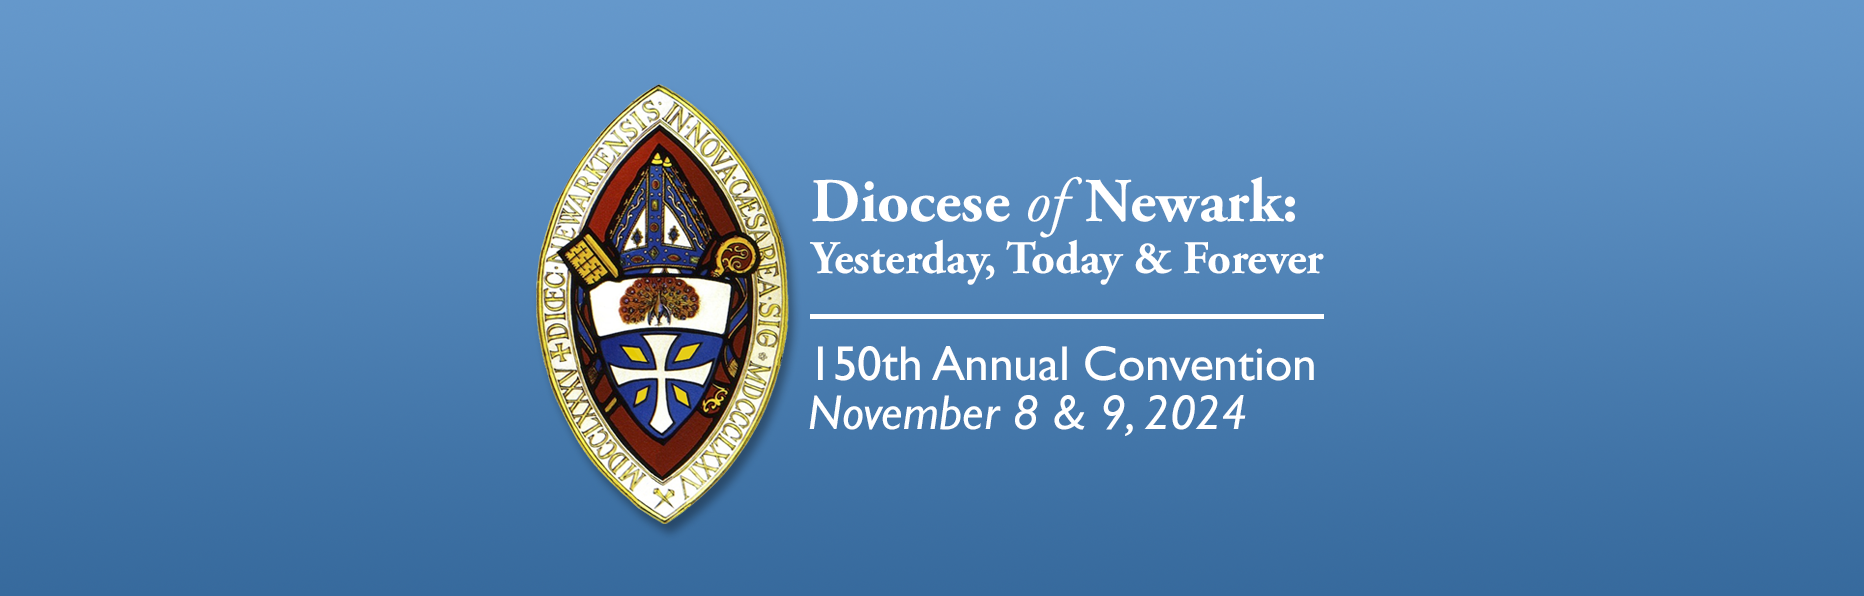 The 150th Convention of the Diocese of Newark